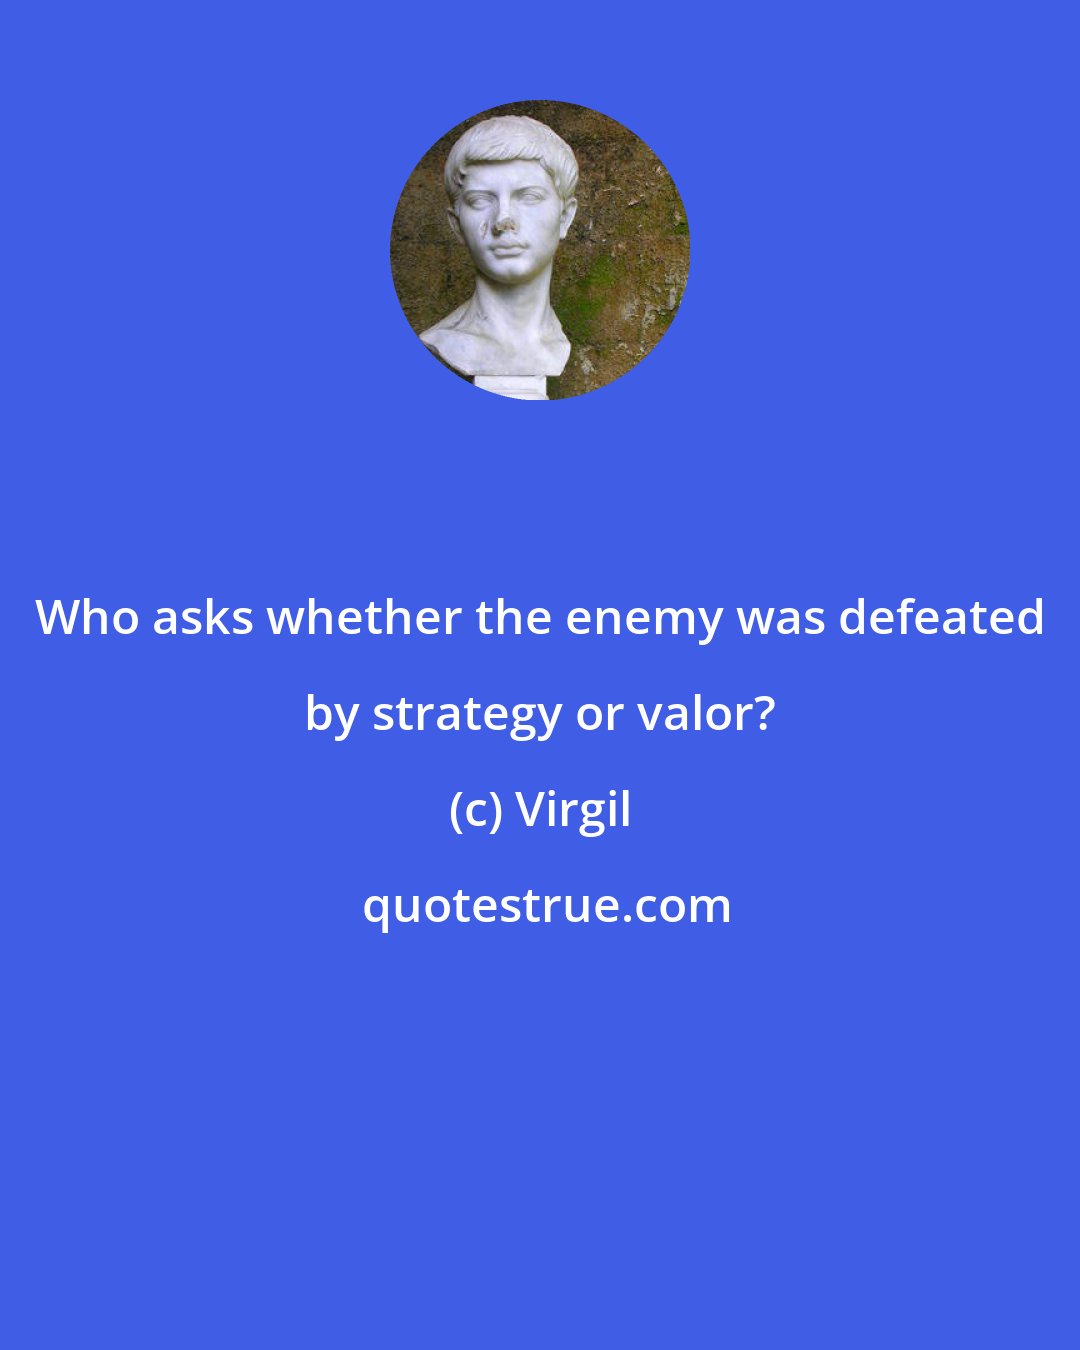 Virgil: Who asks whether the enemy was defeated by strategy or valor?